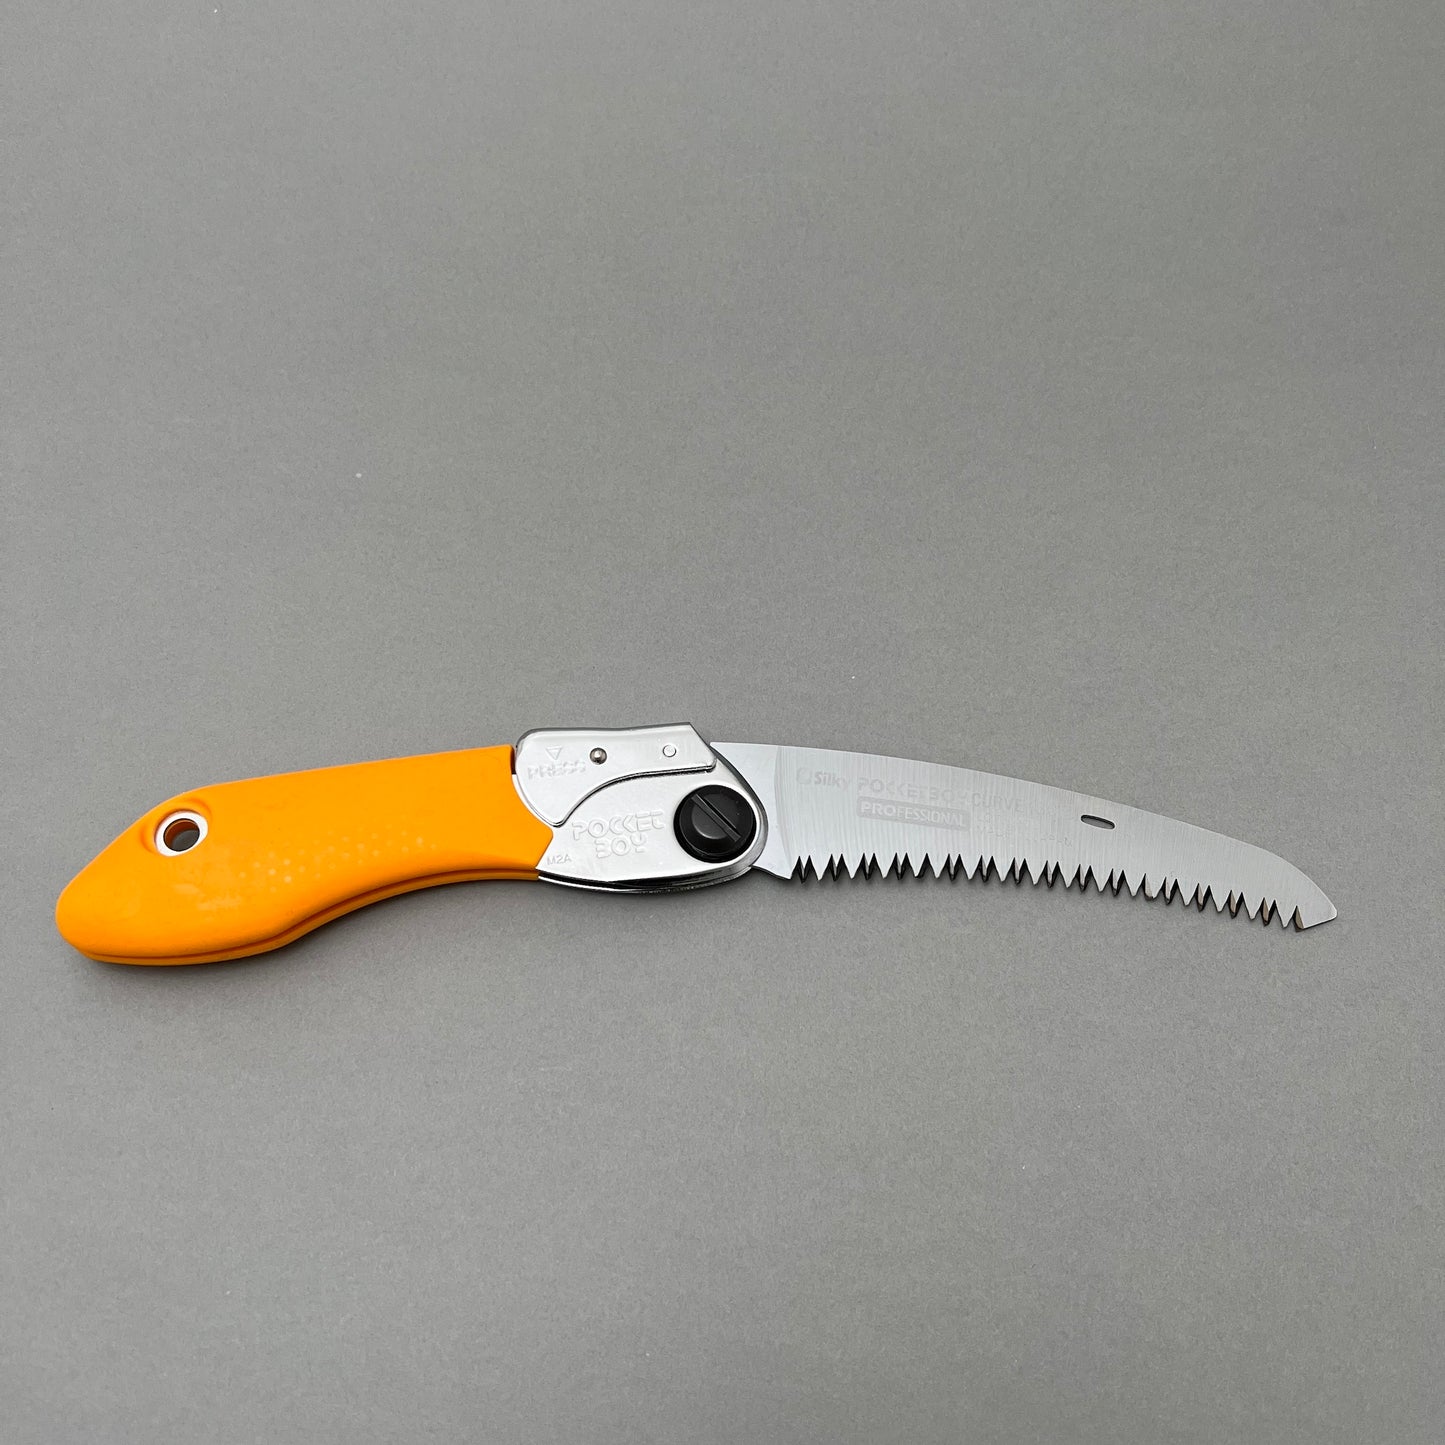 A foldable hand saw laying on a gray background